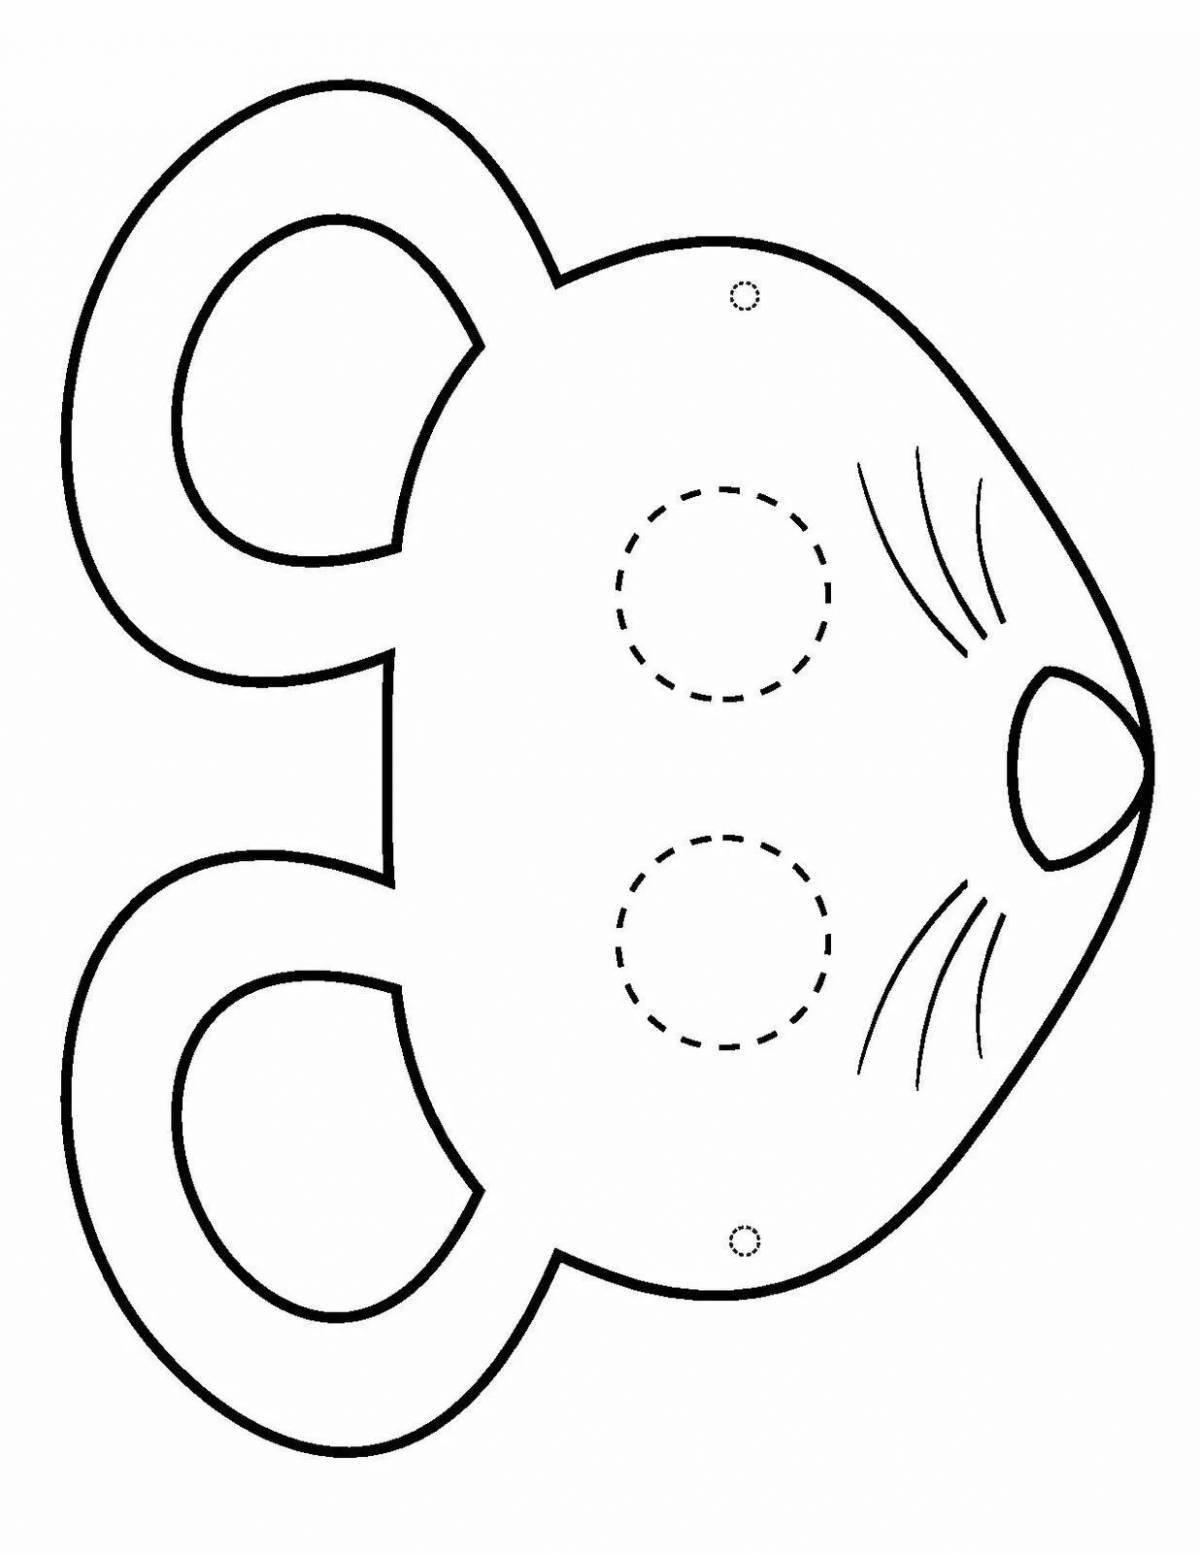 Delightful mouse head coloring page